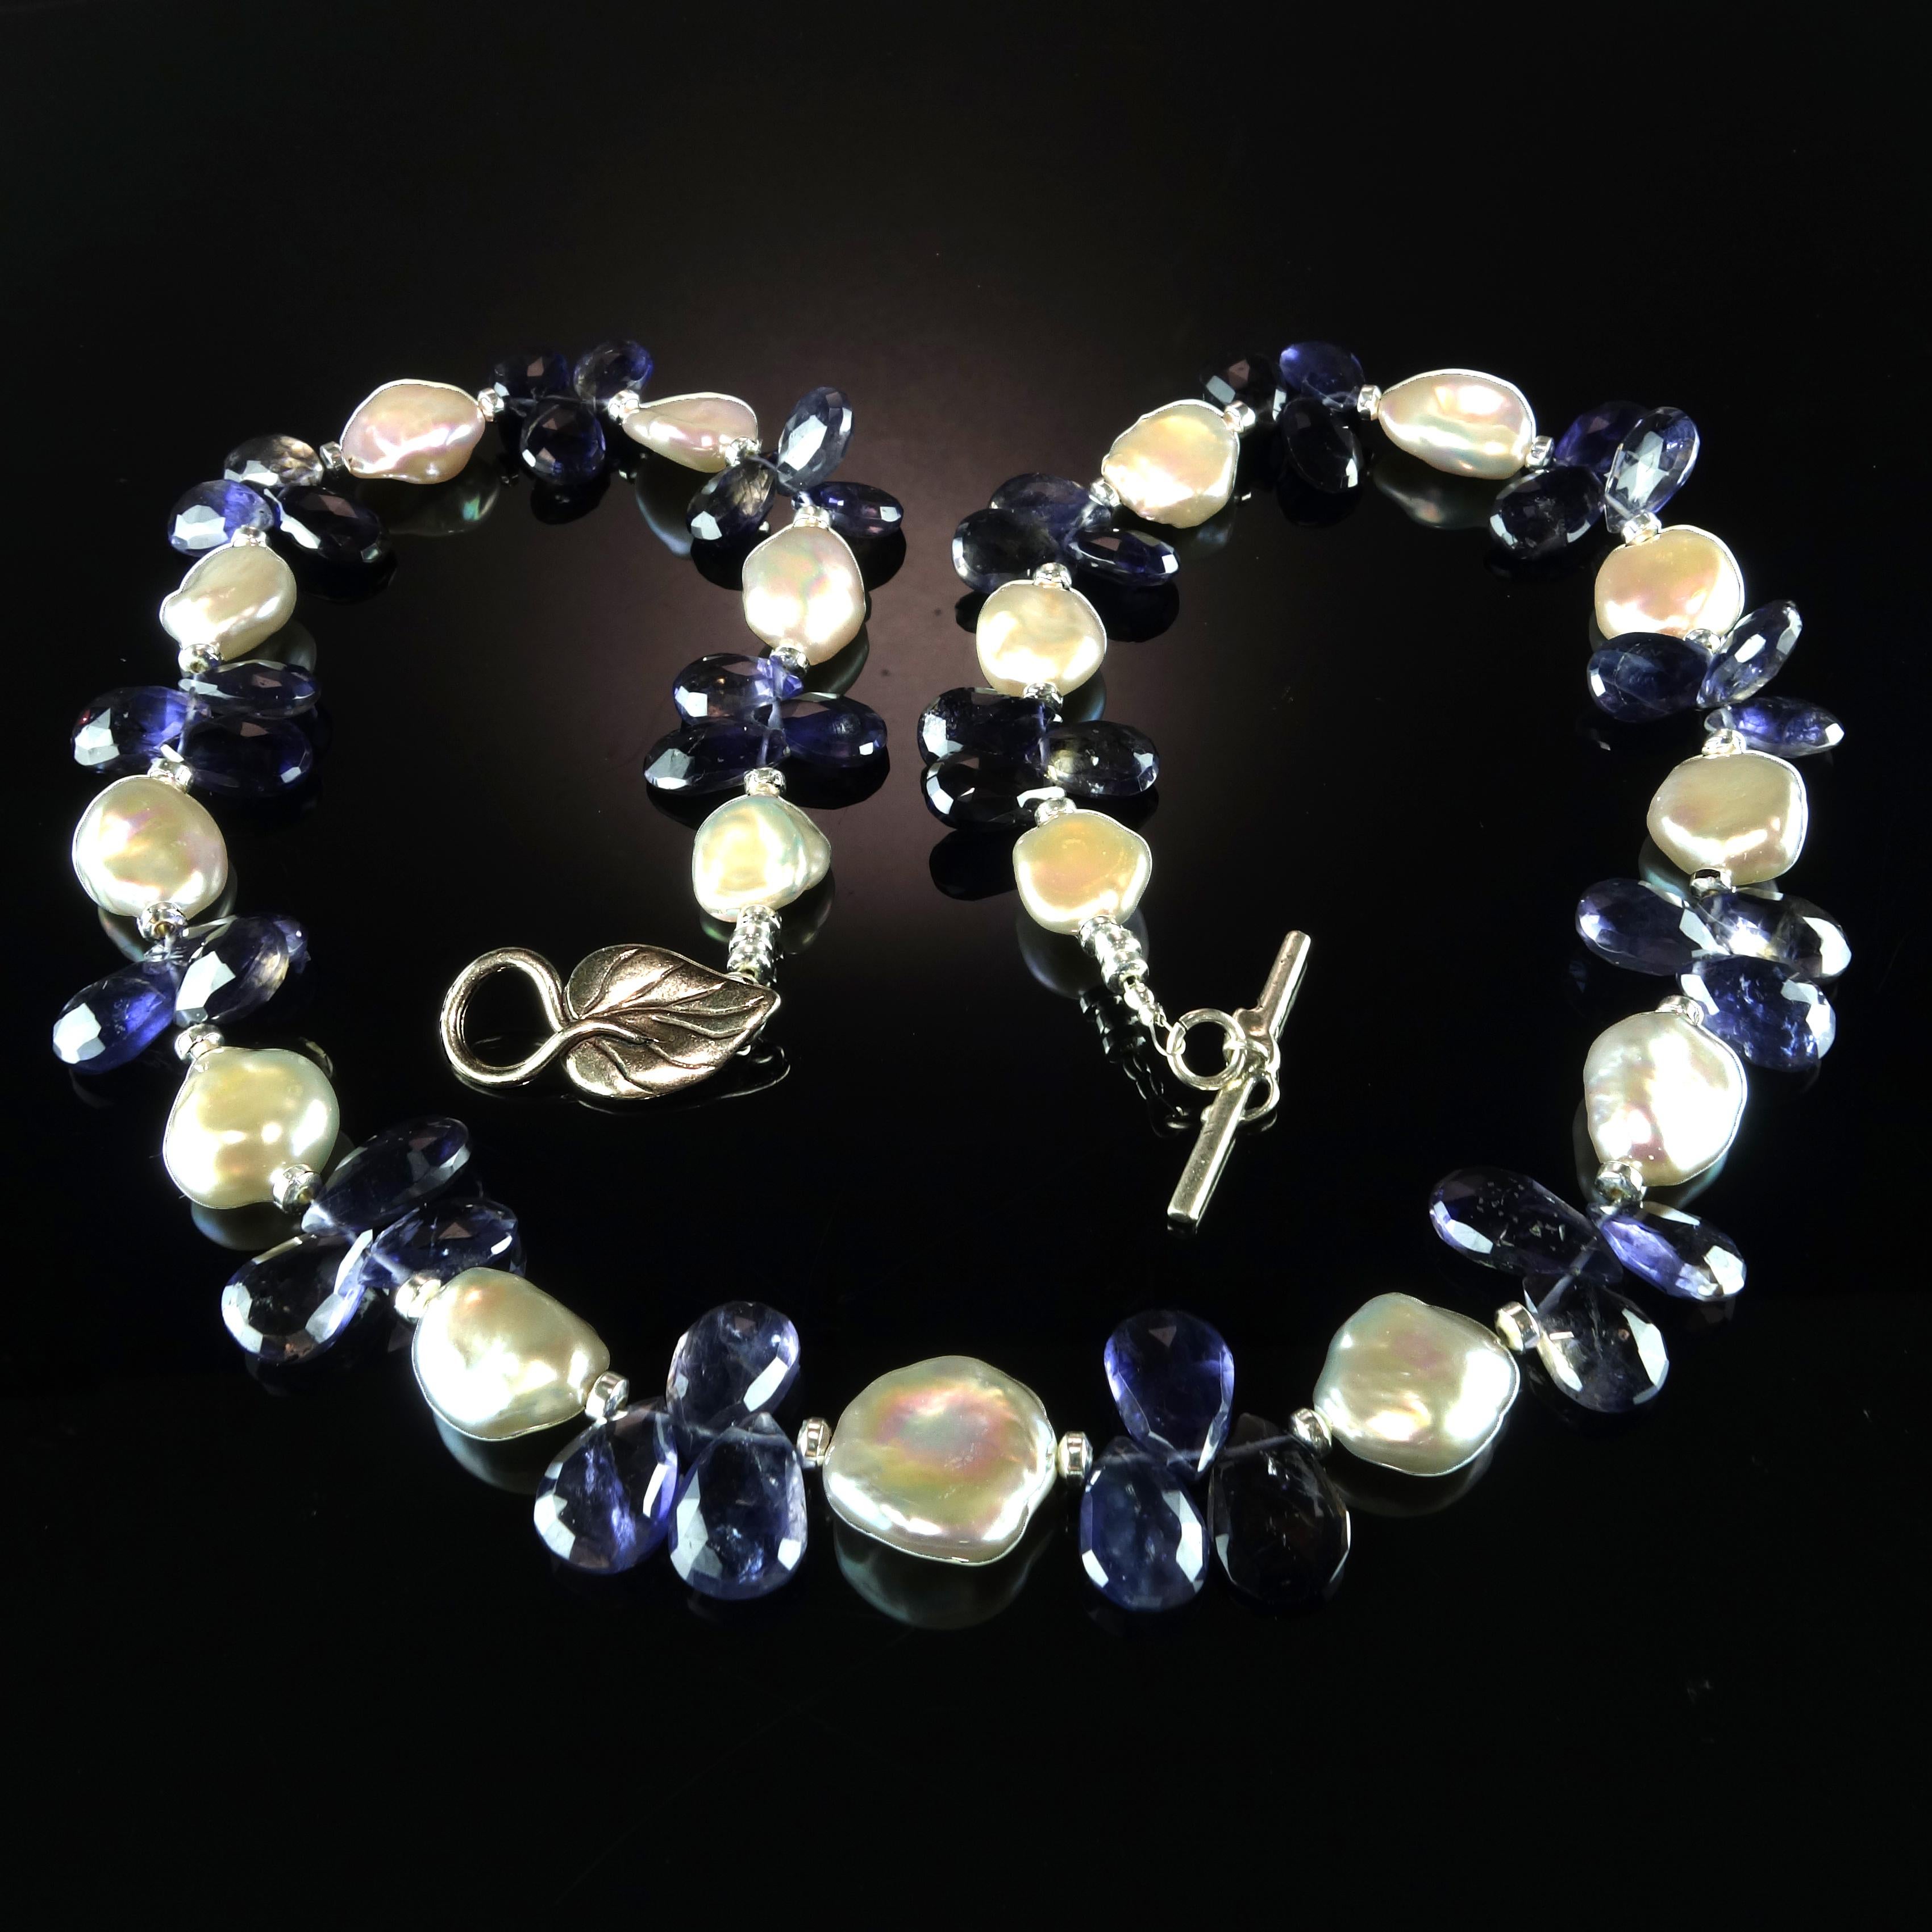 Own the jewelry you wish for

Custom made Blue Iolite Briolettes in threes accented with glowing white Keshi Pearls necklace.  This unique necklace creates a sensation, the iolites are big and bright.  Iolite is a trichroic gemstone.  It will look